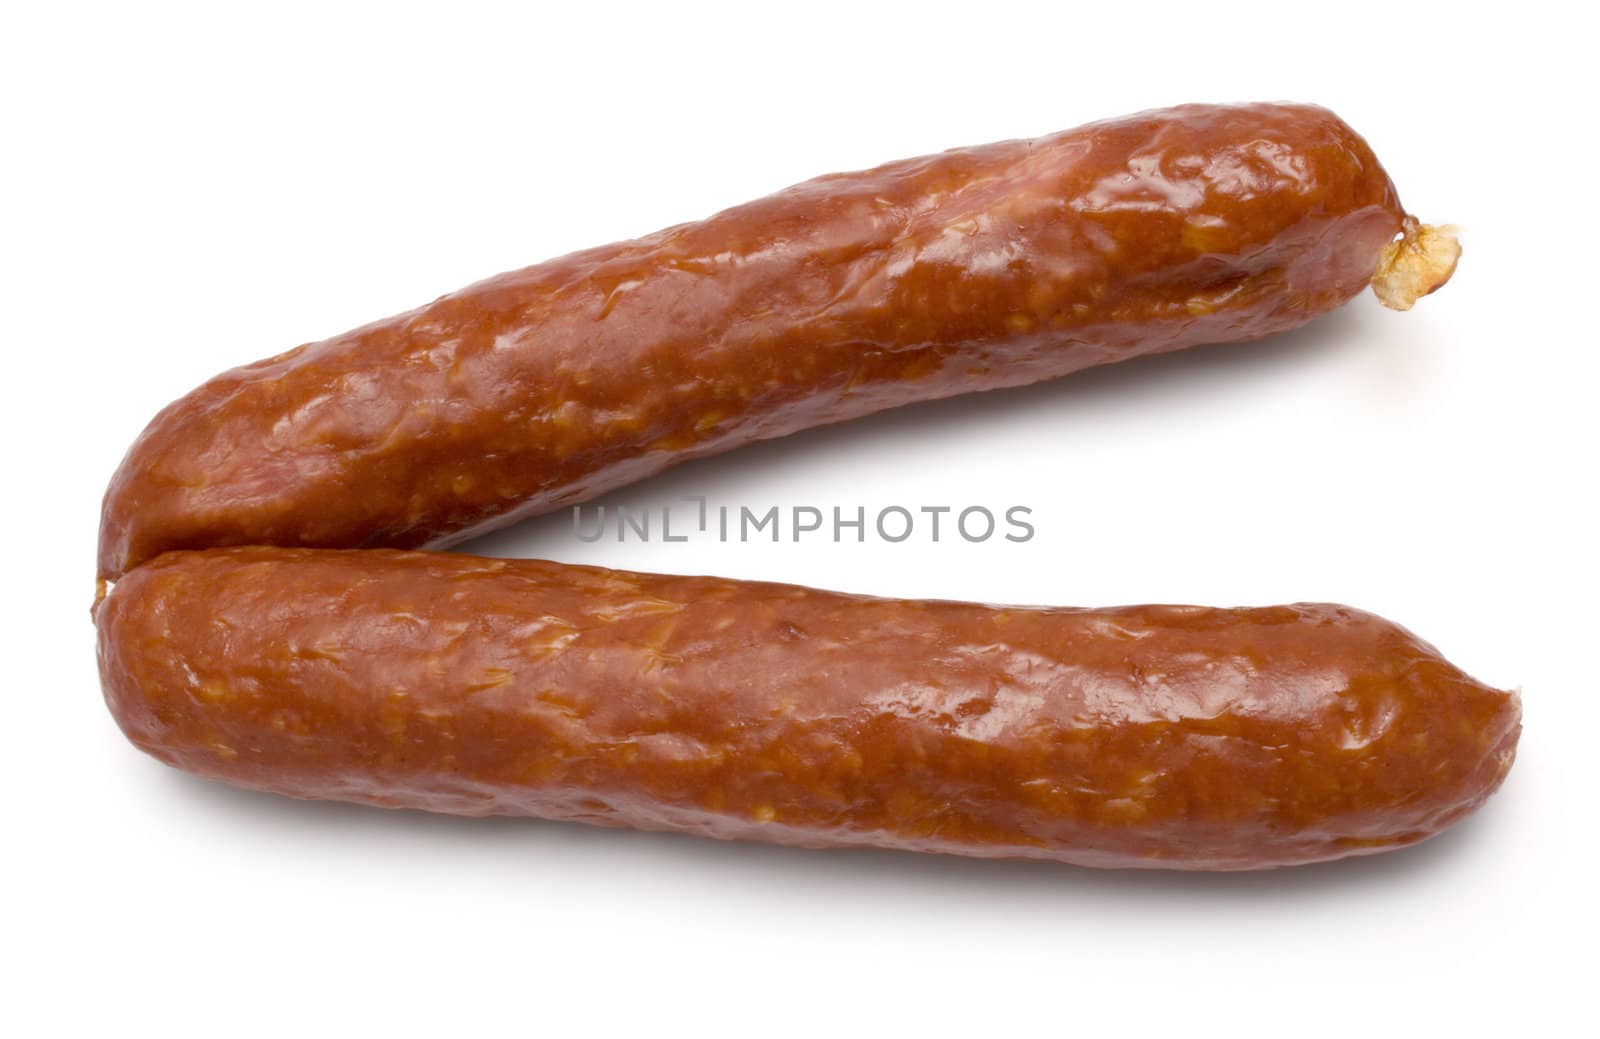 Pair of sausages isolated on a white background.